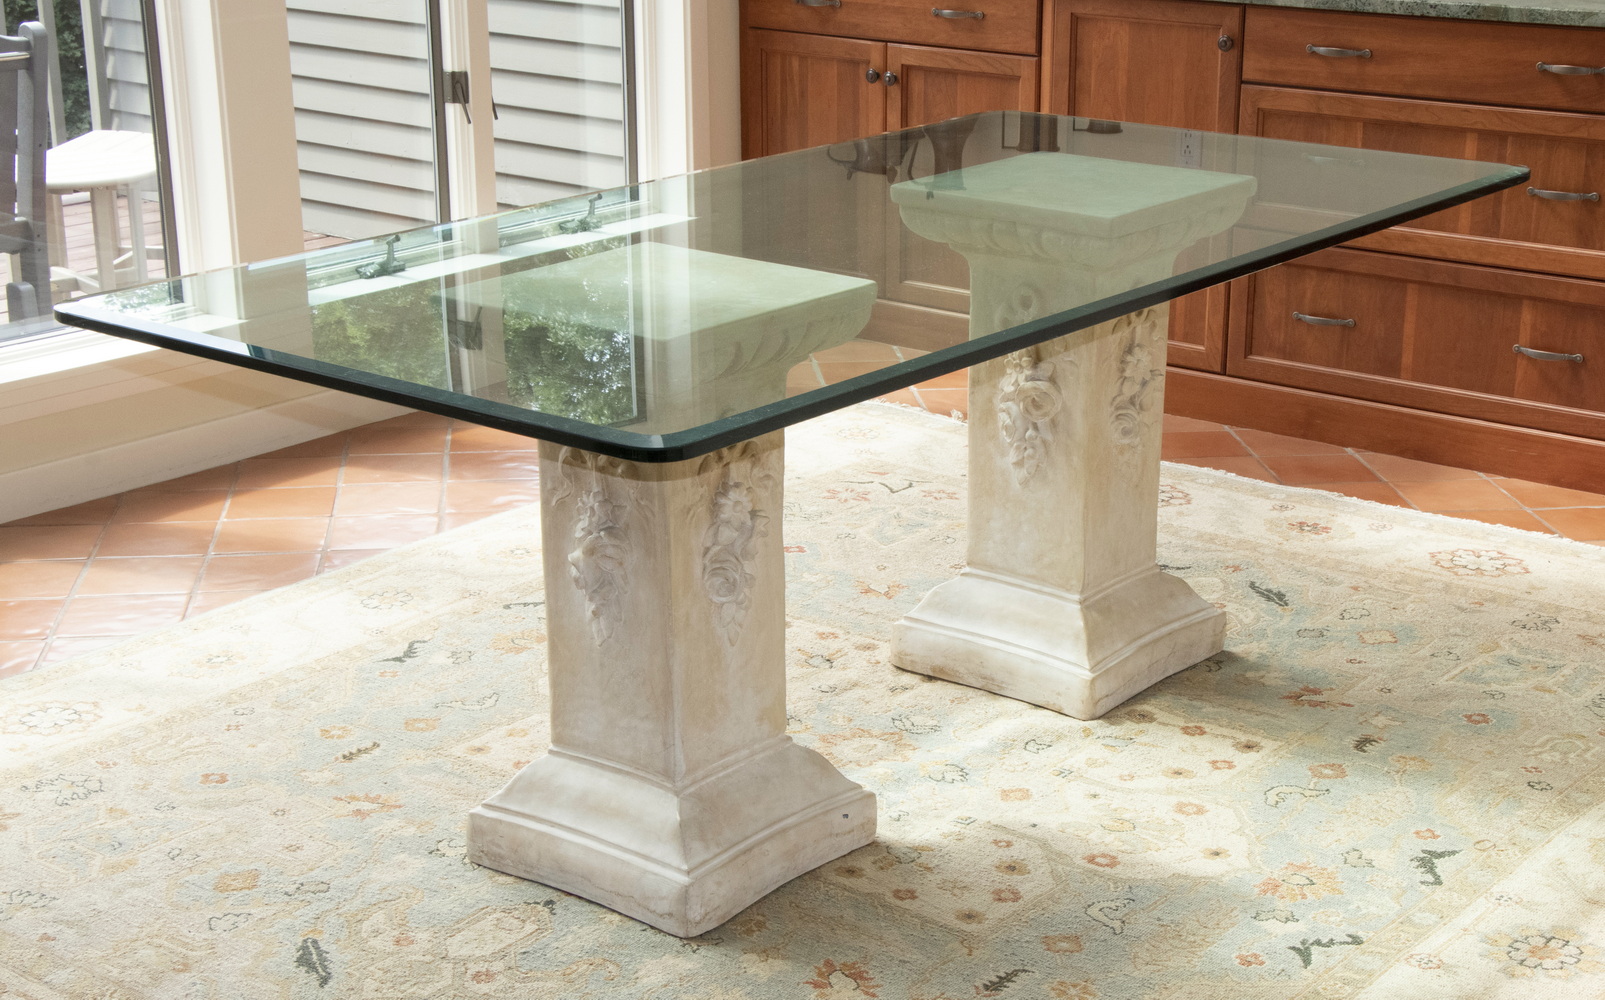 GLASS DINING TABLE ON PLASTER COLUMNS 2b3e46